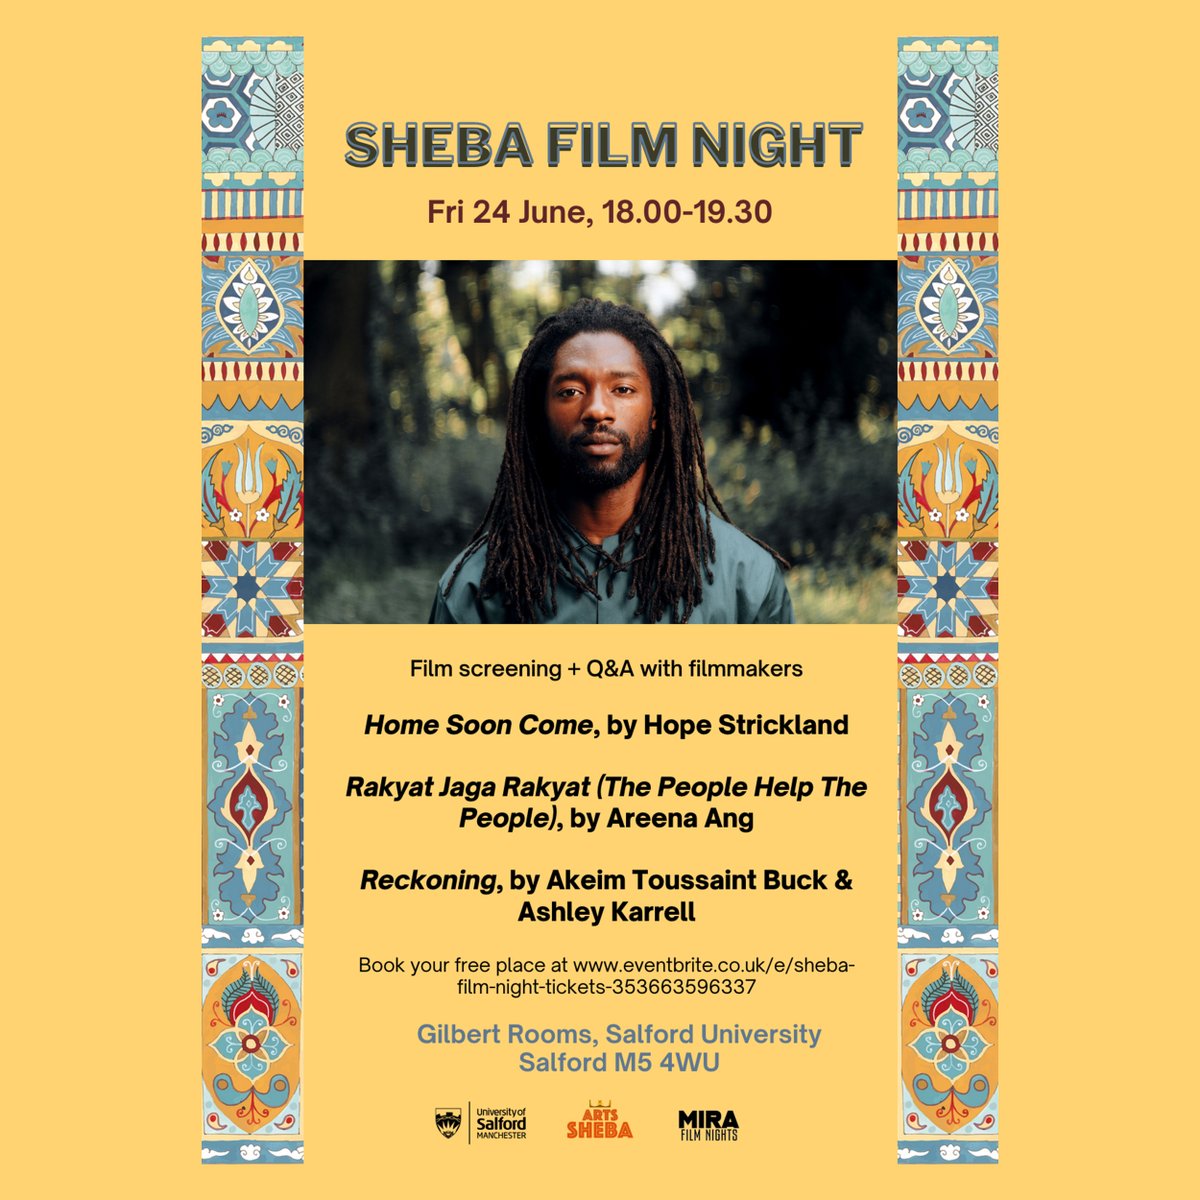 Come join us on Friday 24th June between 6-8pm for our film sharing of #RECKONING the film and post-show discussion

eventbrite.co.uk/e/sheba-film-n…

#justiceforrefugees
#refugeeweek
#reckoningthefilm
#films
#director
#dance
#dancefilms
#animation
#changeforthebetter